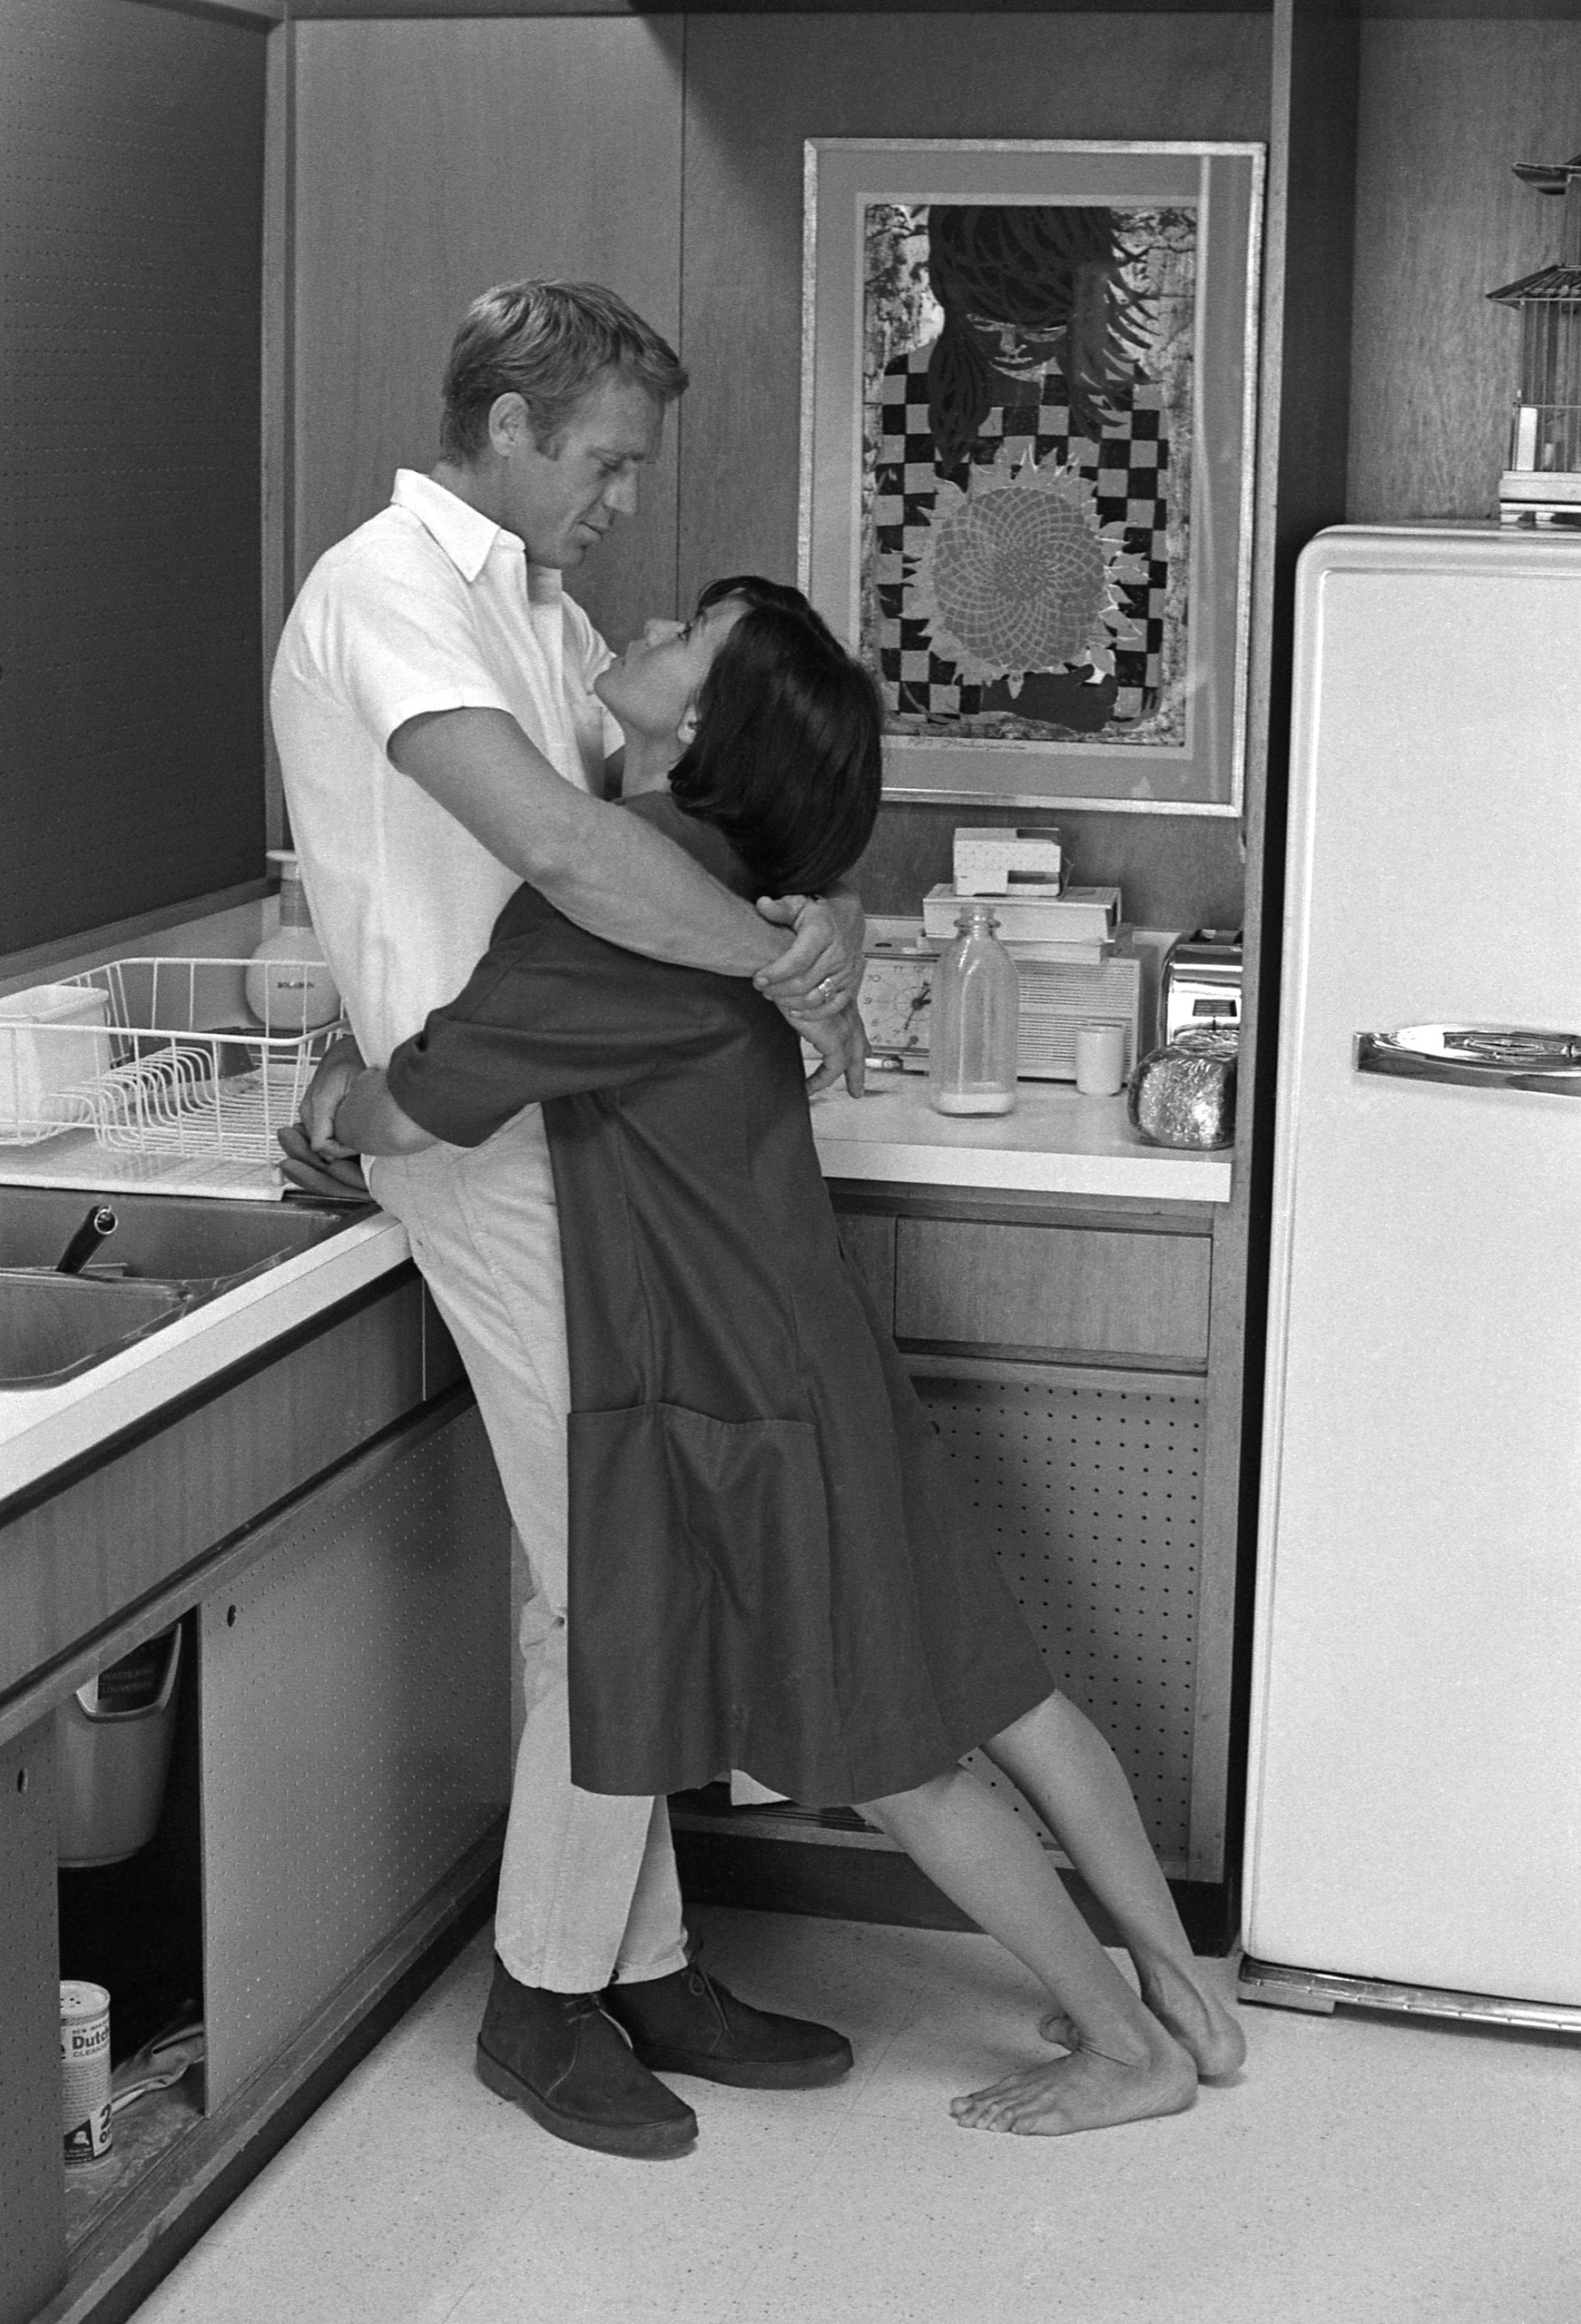 Steve McQueen and his wife, Neile Adams, embrace in the kitchen of their Hollywood home, 1963.